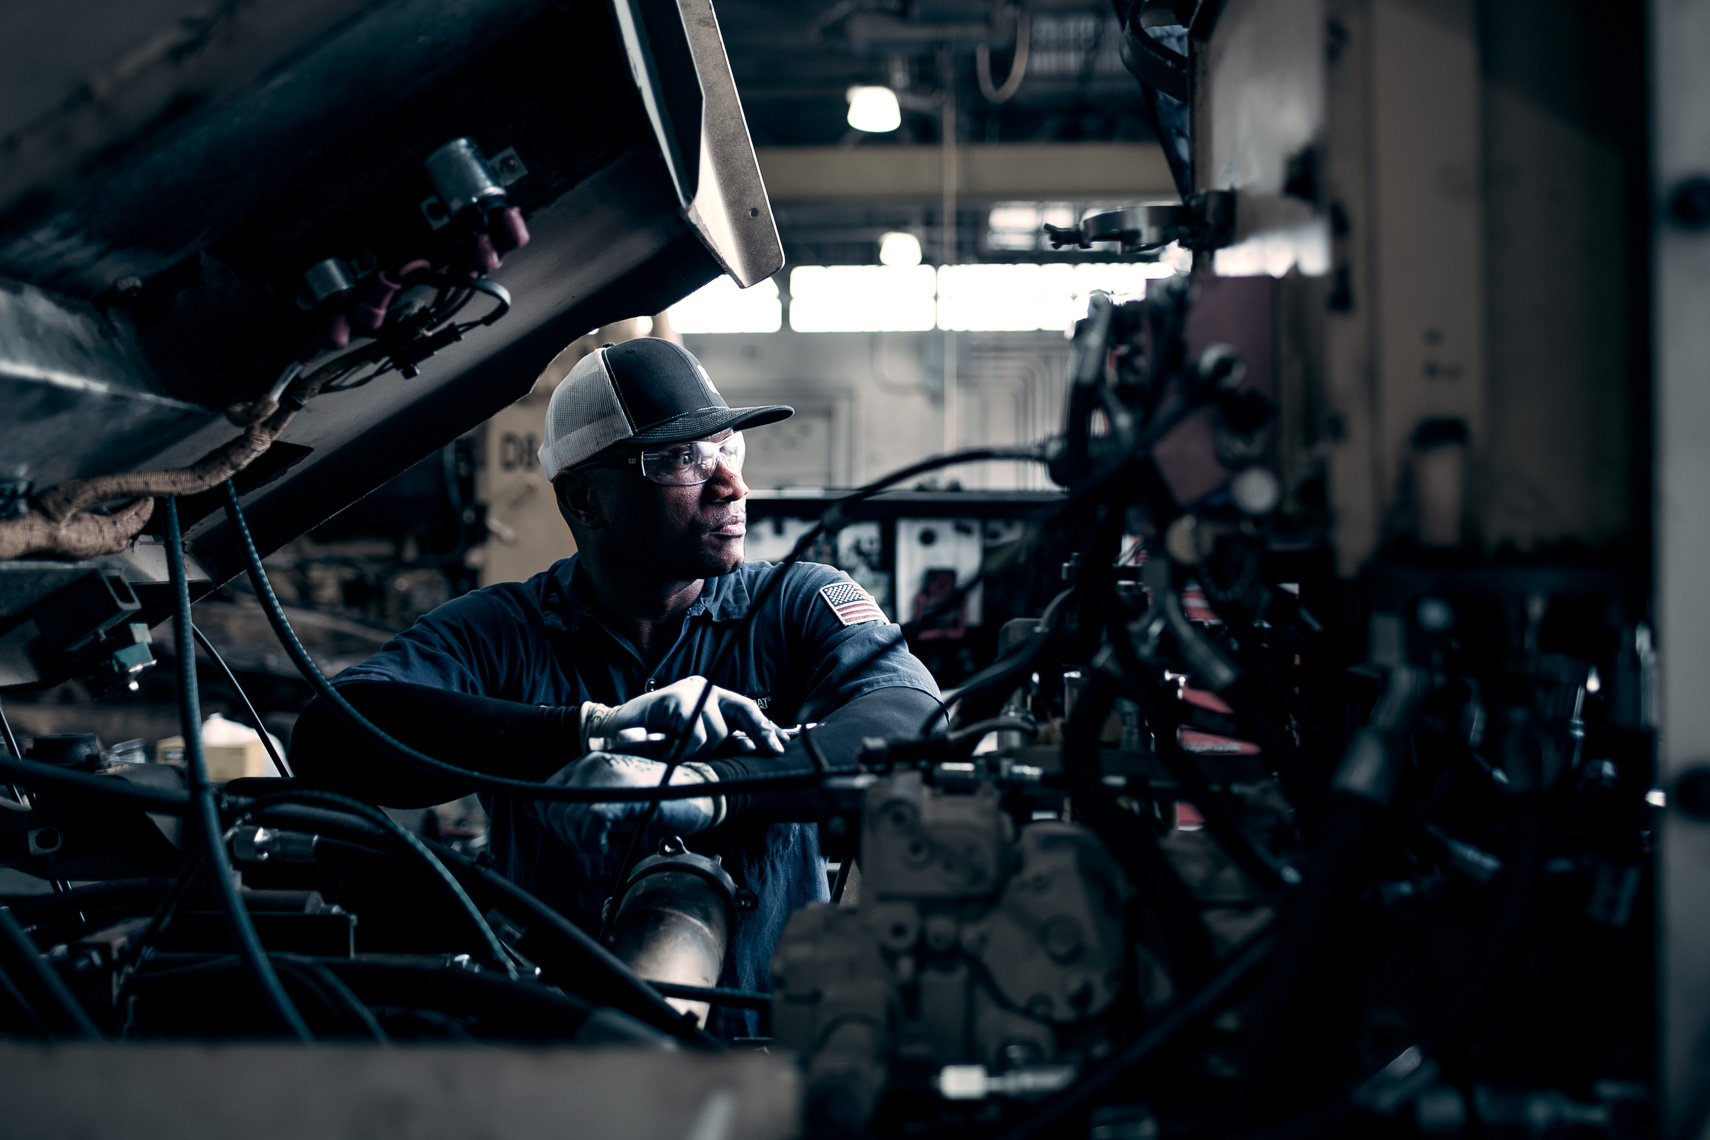 Service_Technicians_for_Gregory_Poole_20190904_photo_by_Justin_Kase_Conder_1981-Edit_Work.JPG